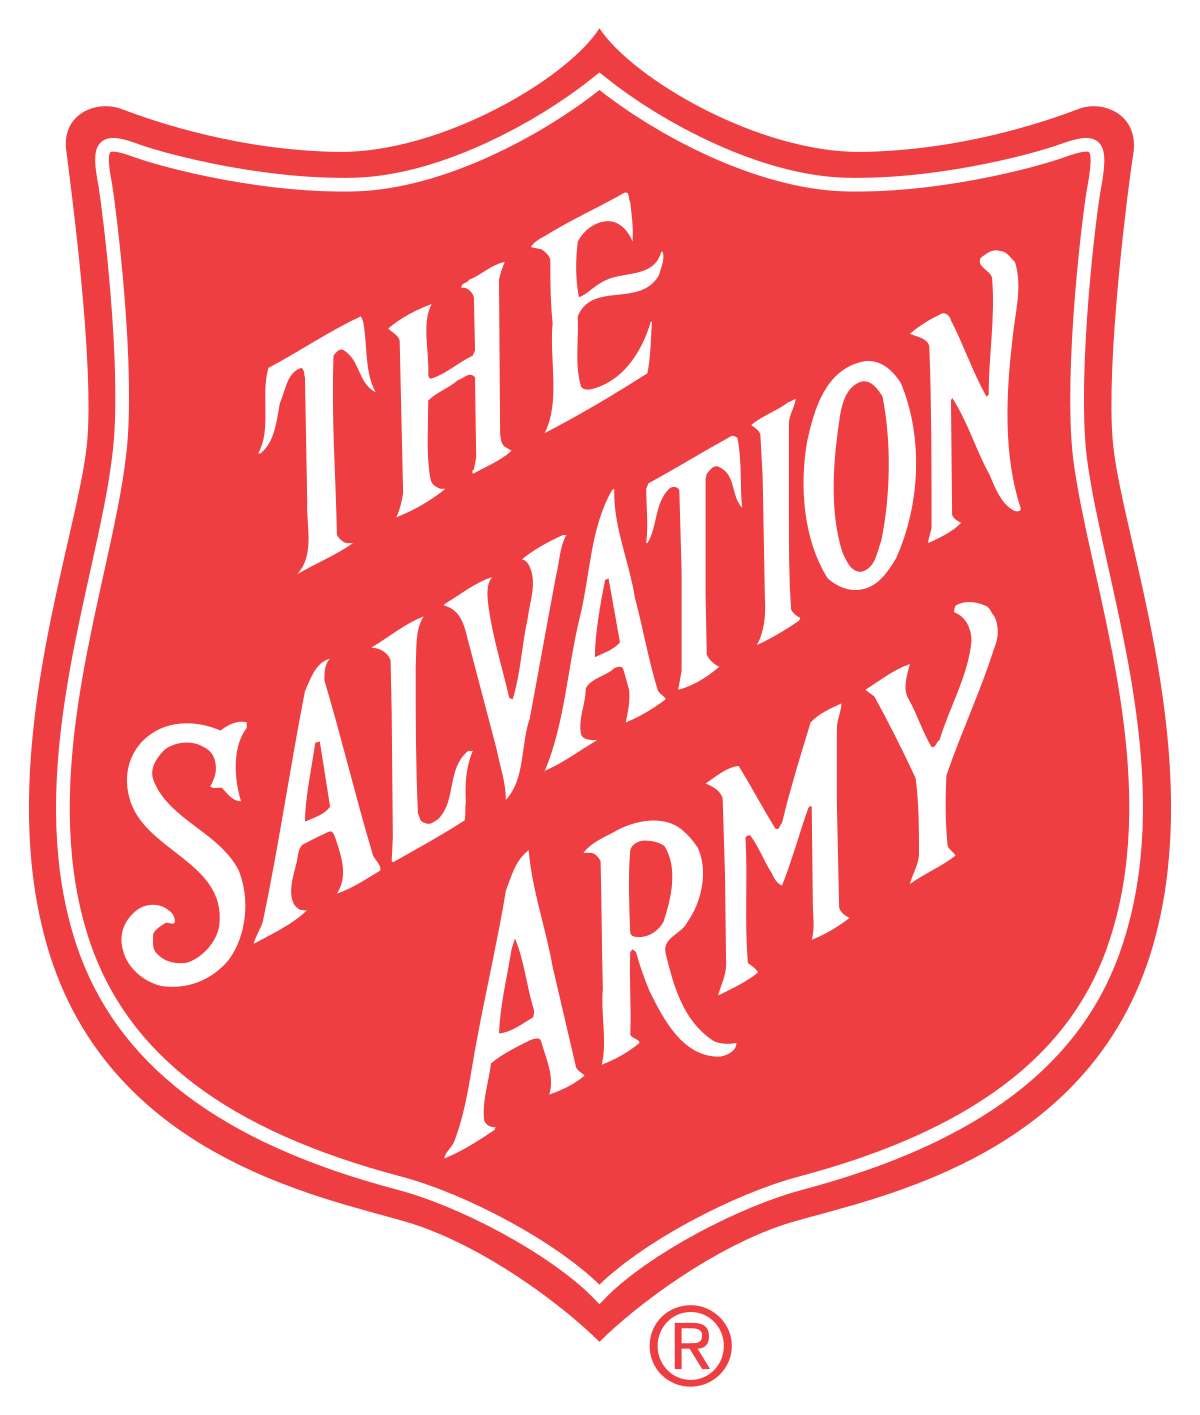 Salvation Army logo: red shield with 